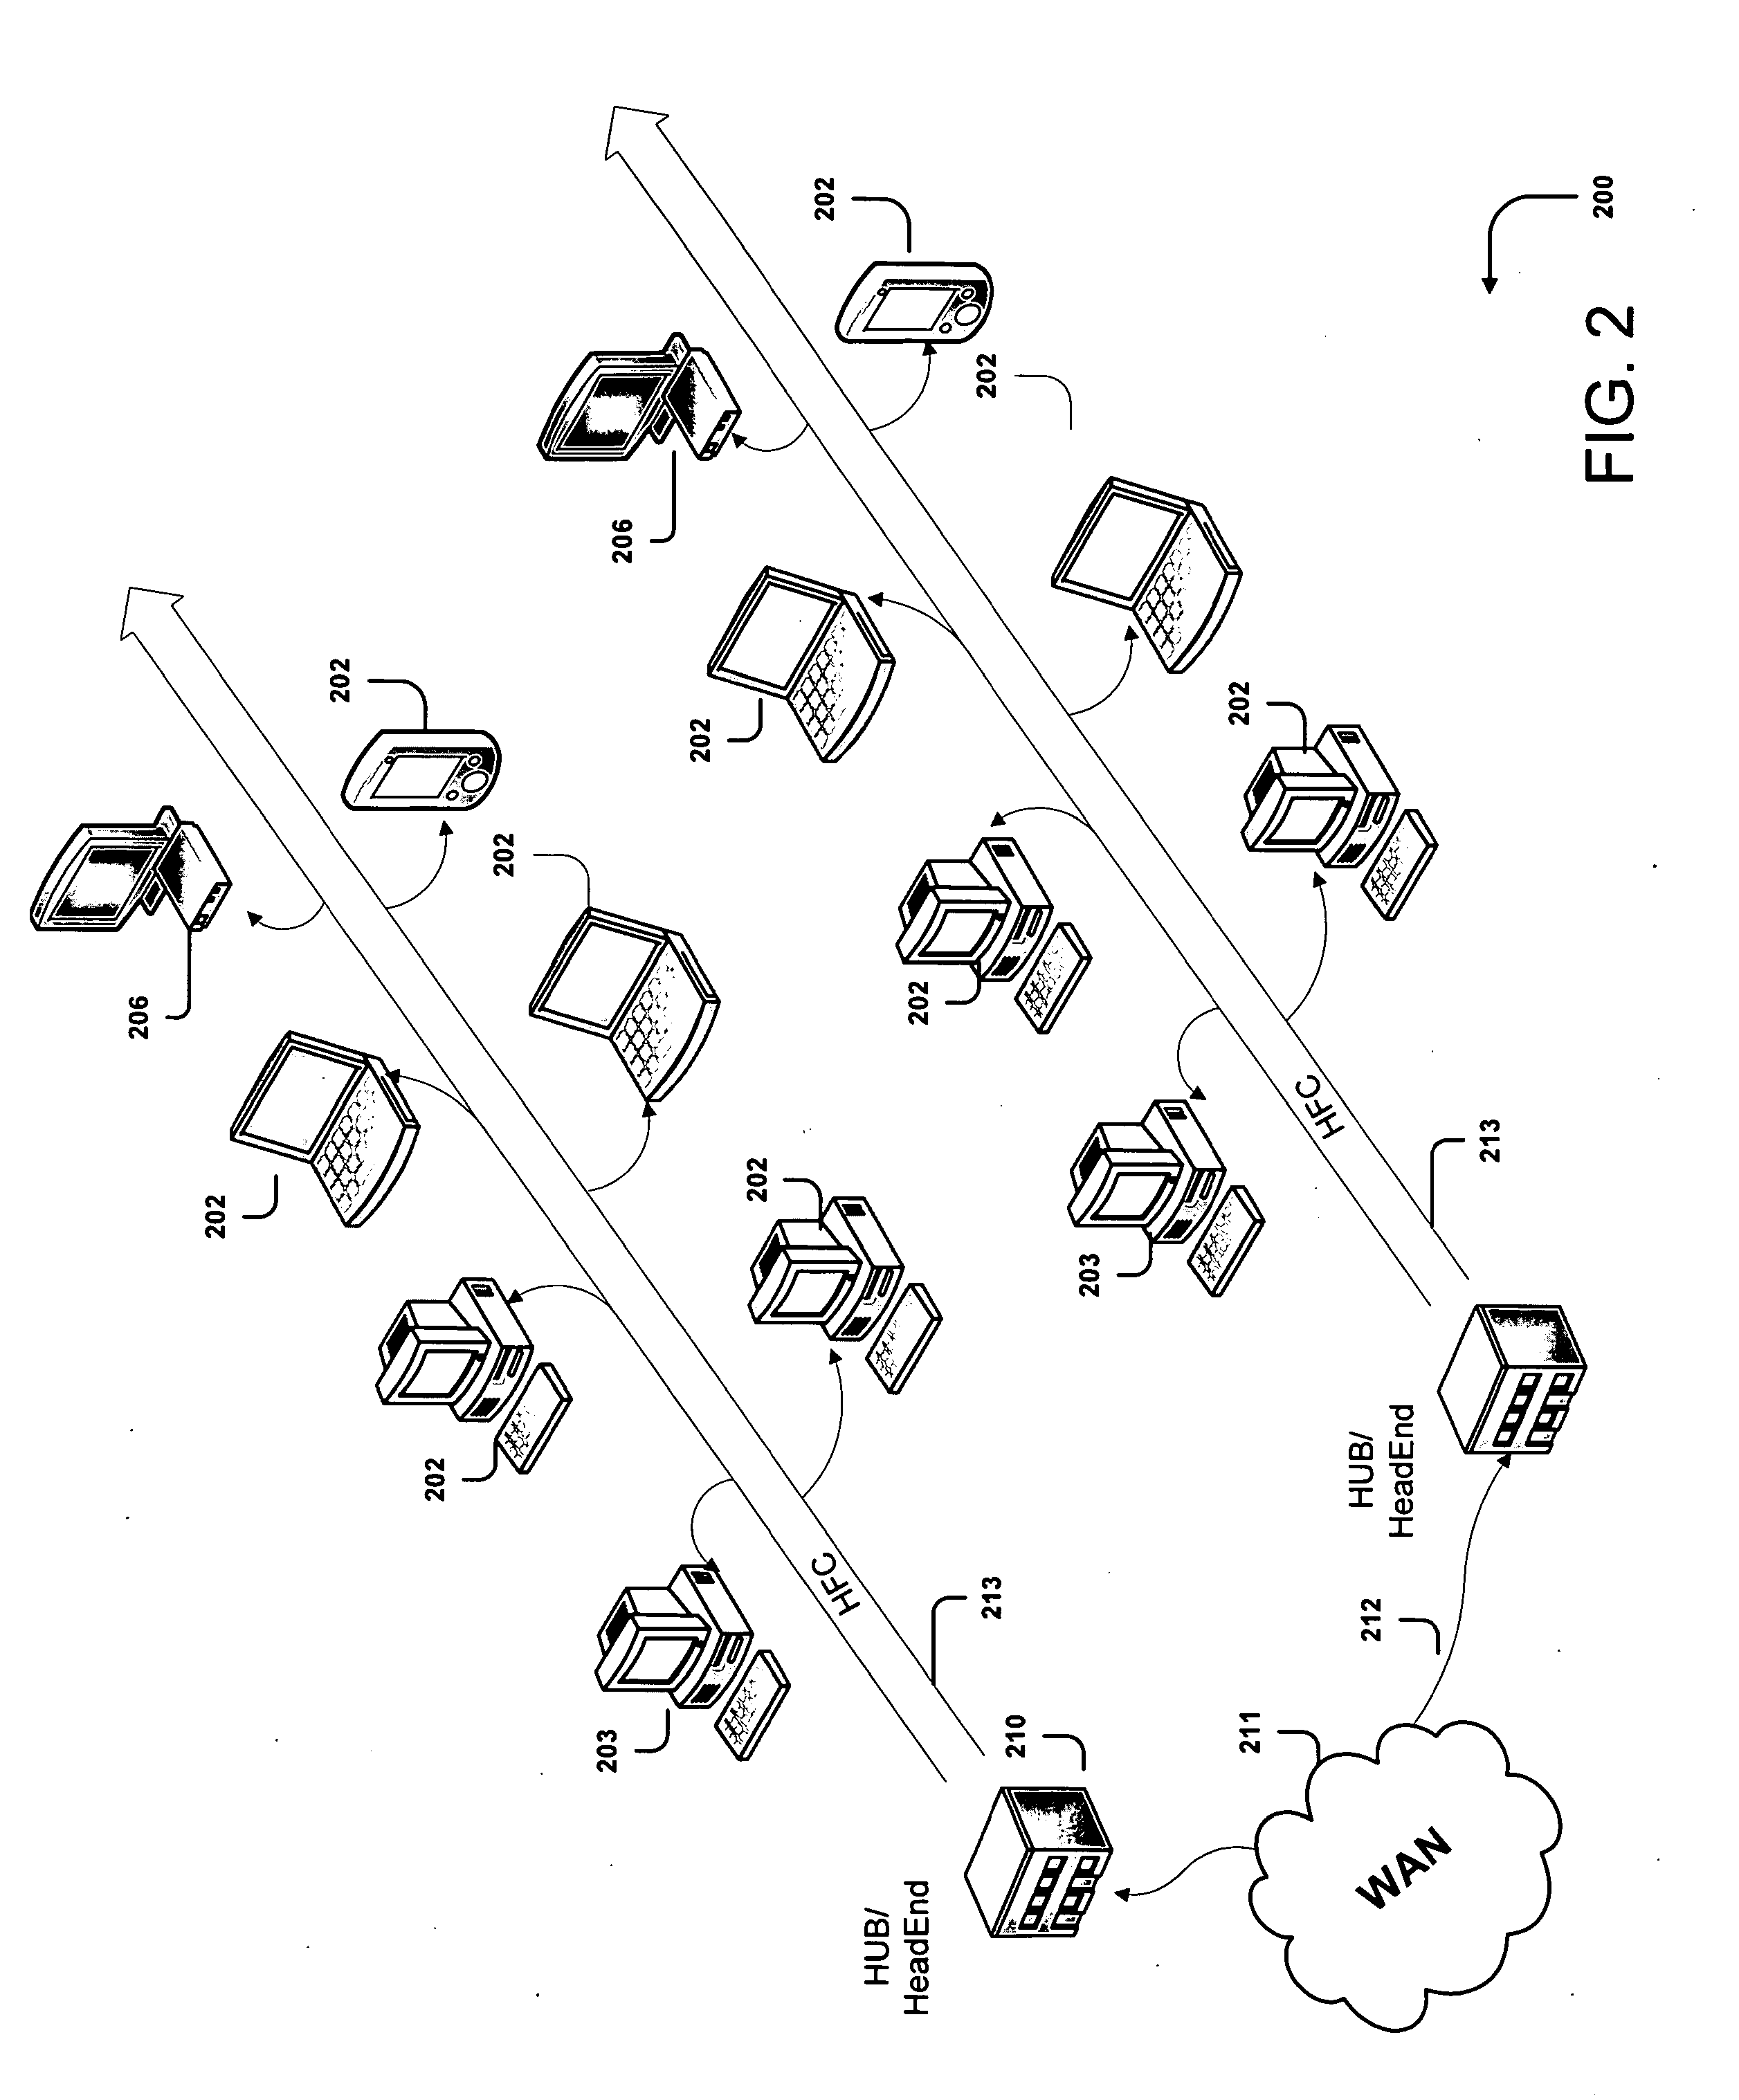 Methods and System for Efficient Data Transfer Over Hybrid Fiber Coax Infrastructure